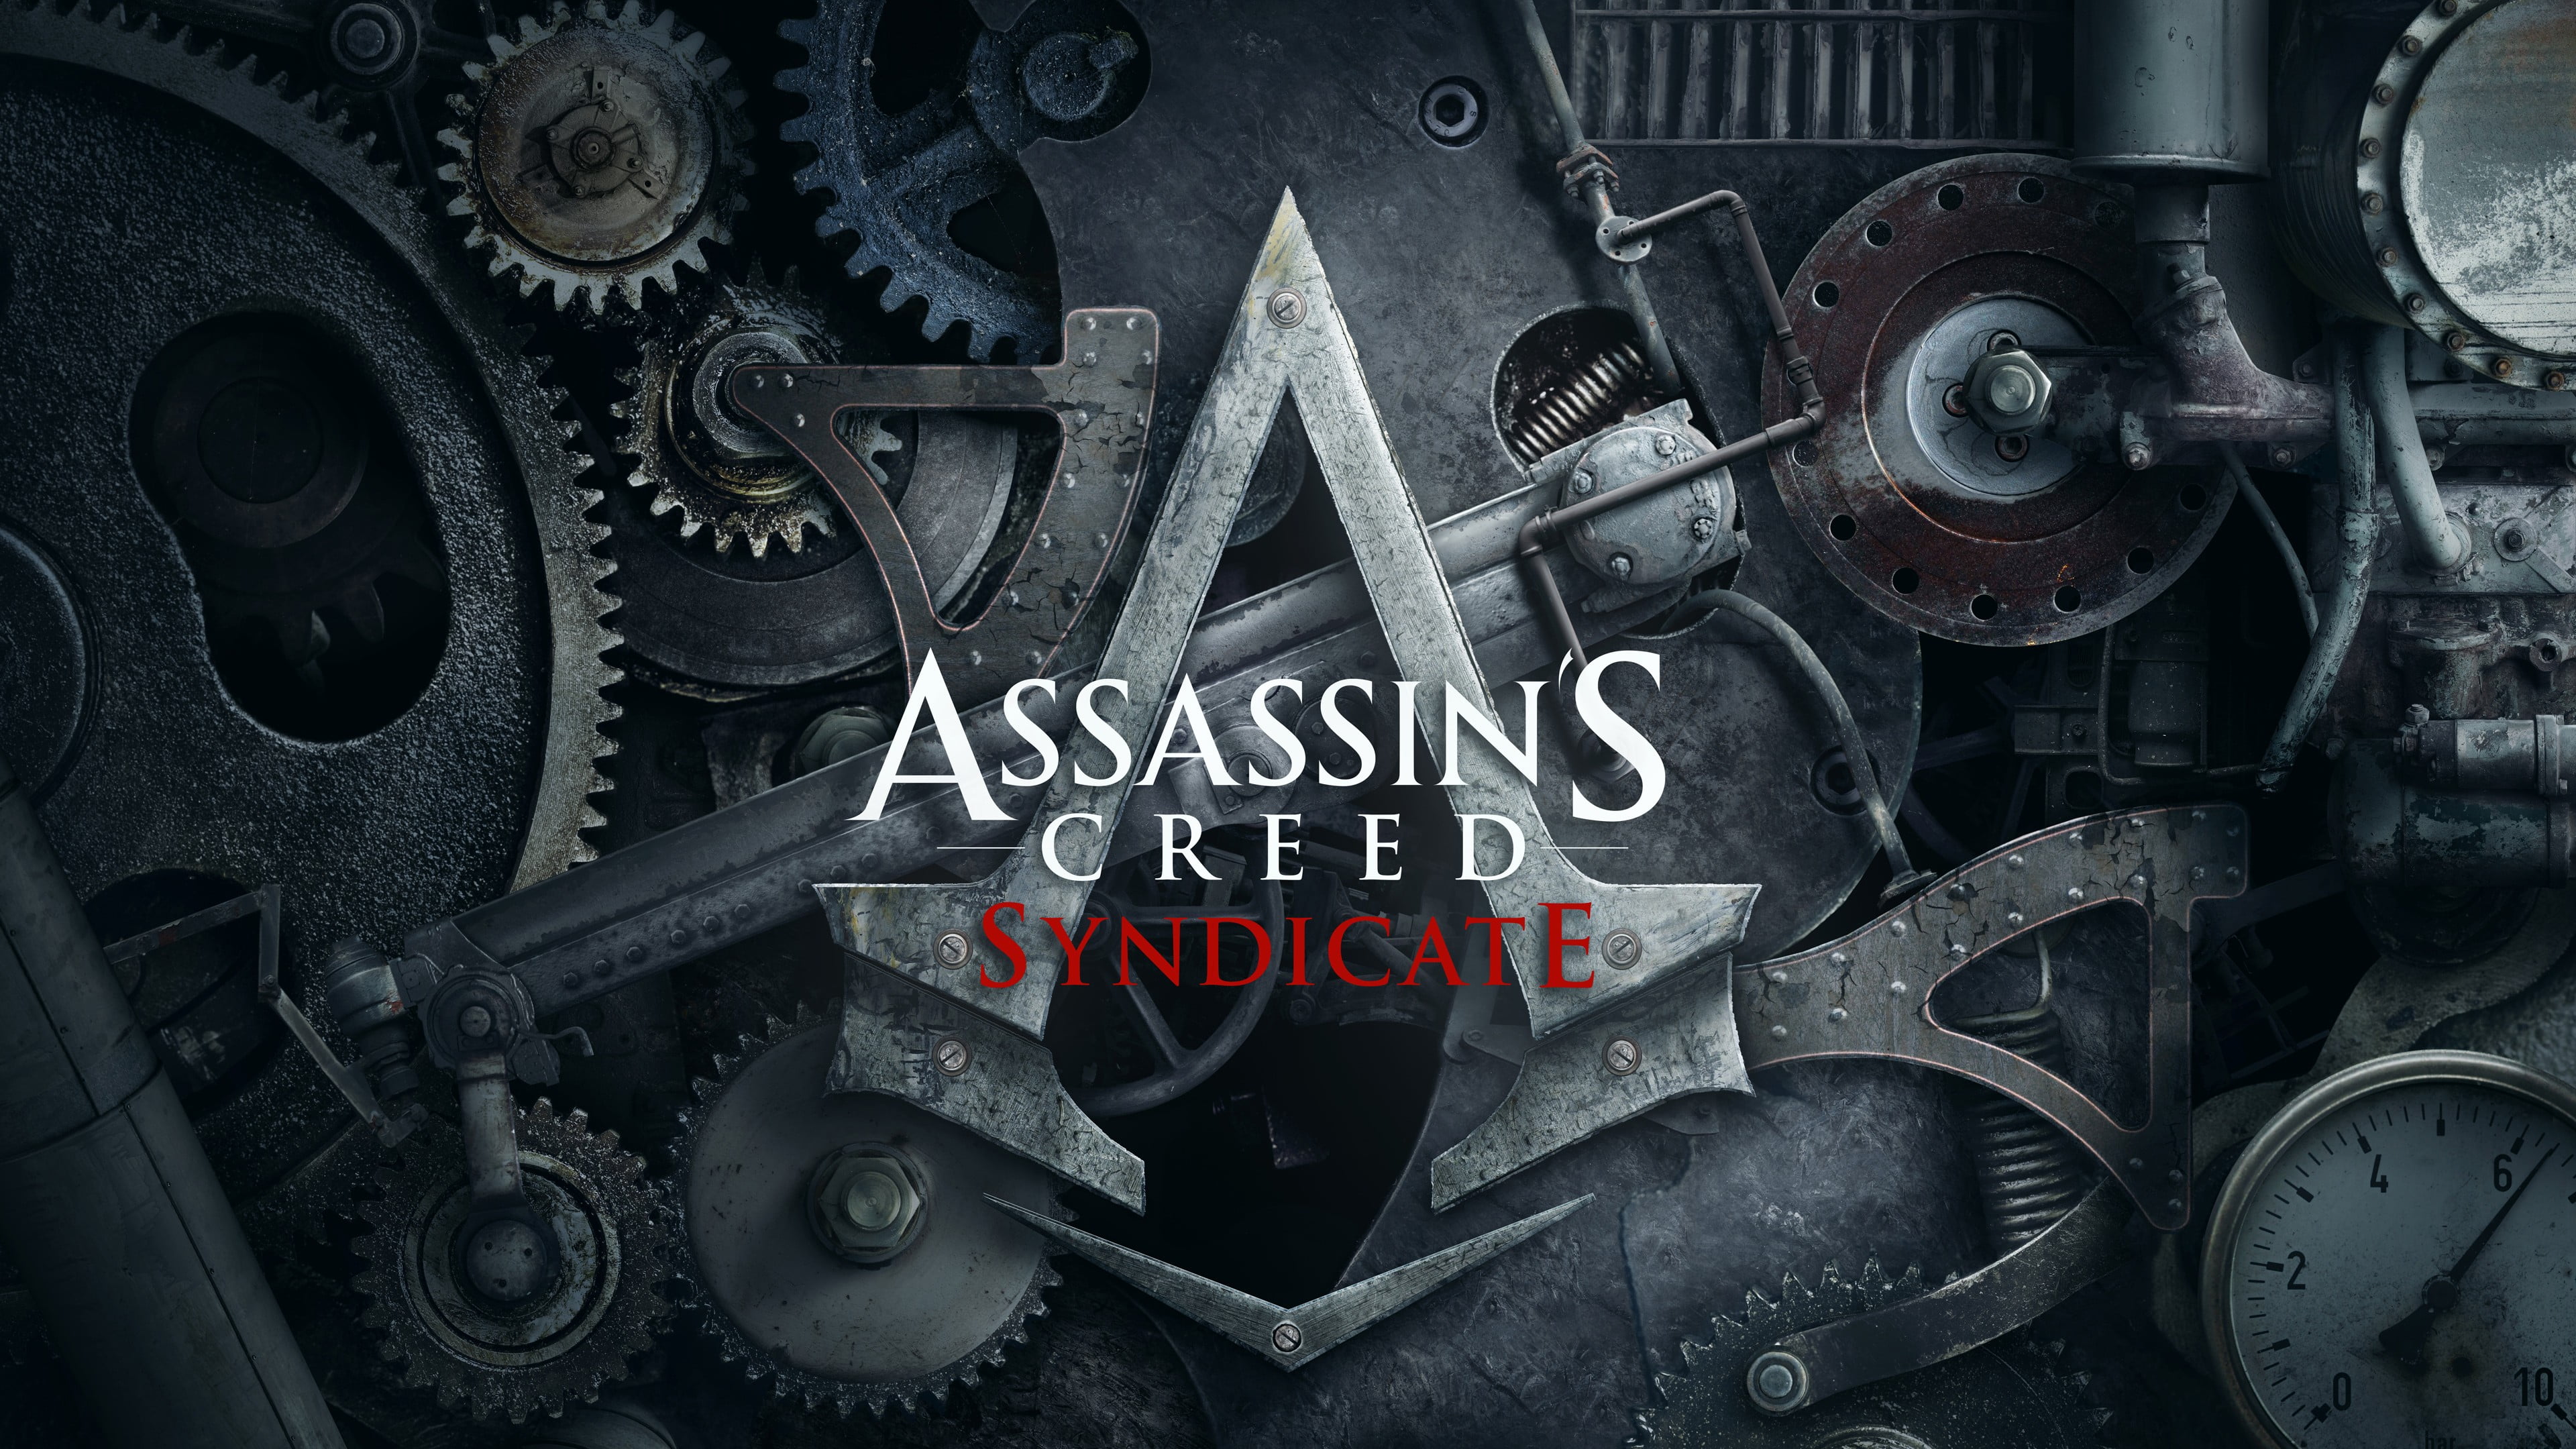 Assassin's Creed Syndicate digital wallpaper, text, metal, communication